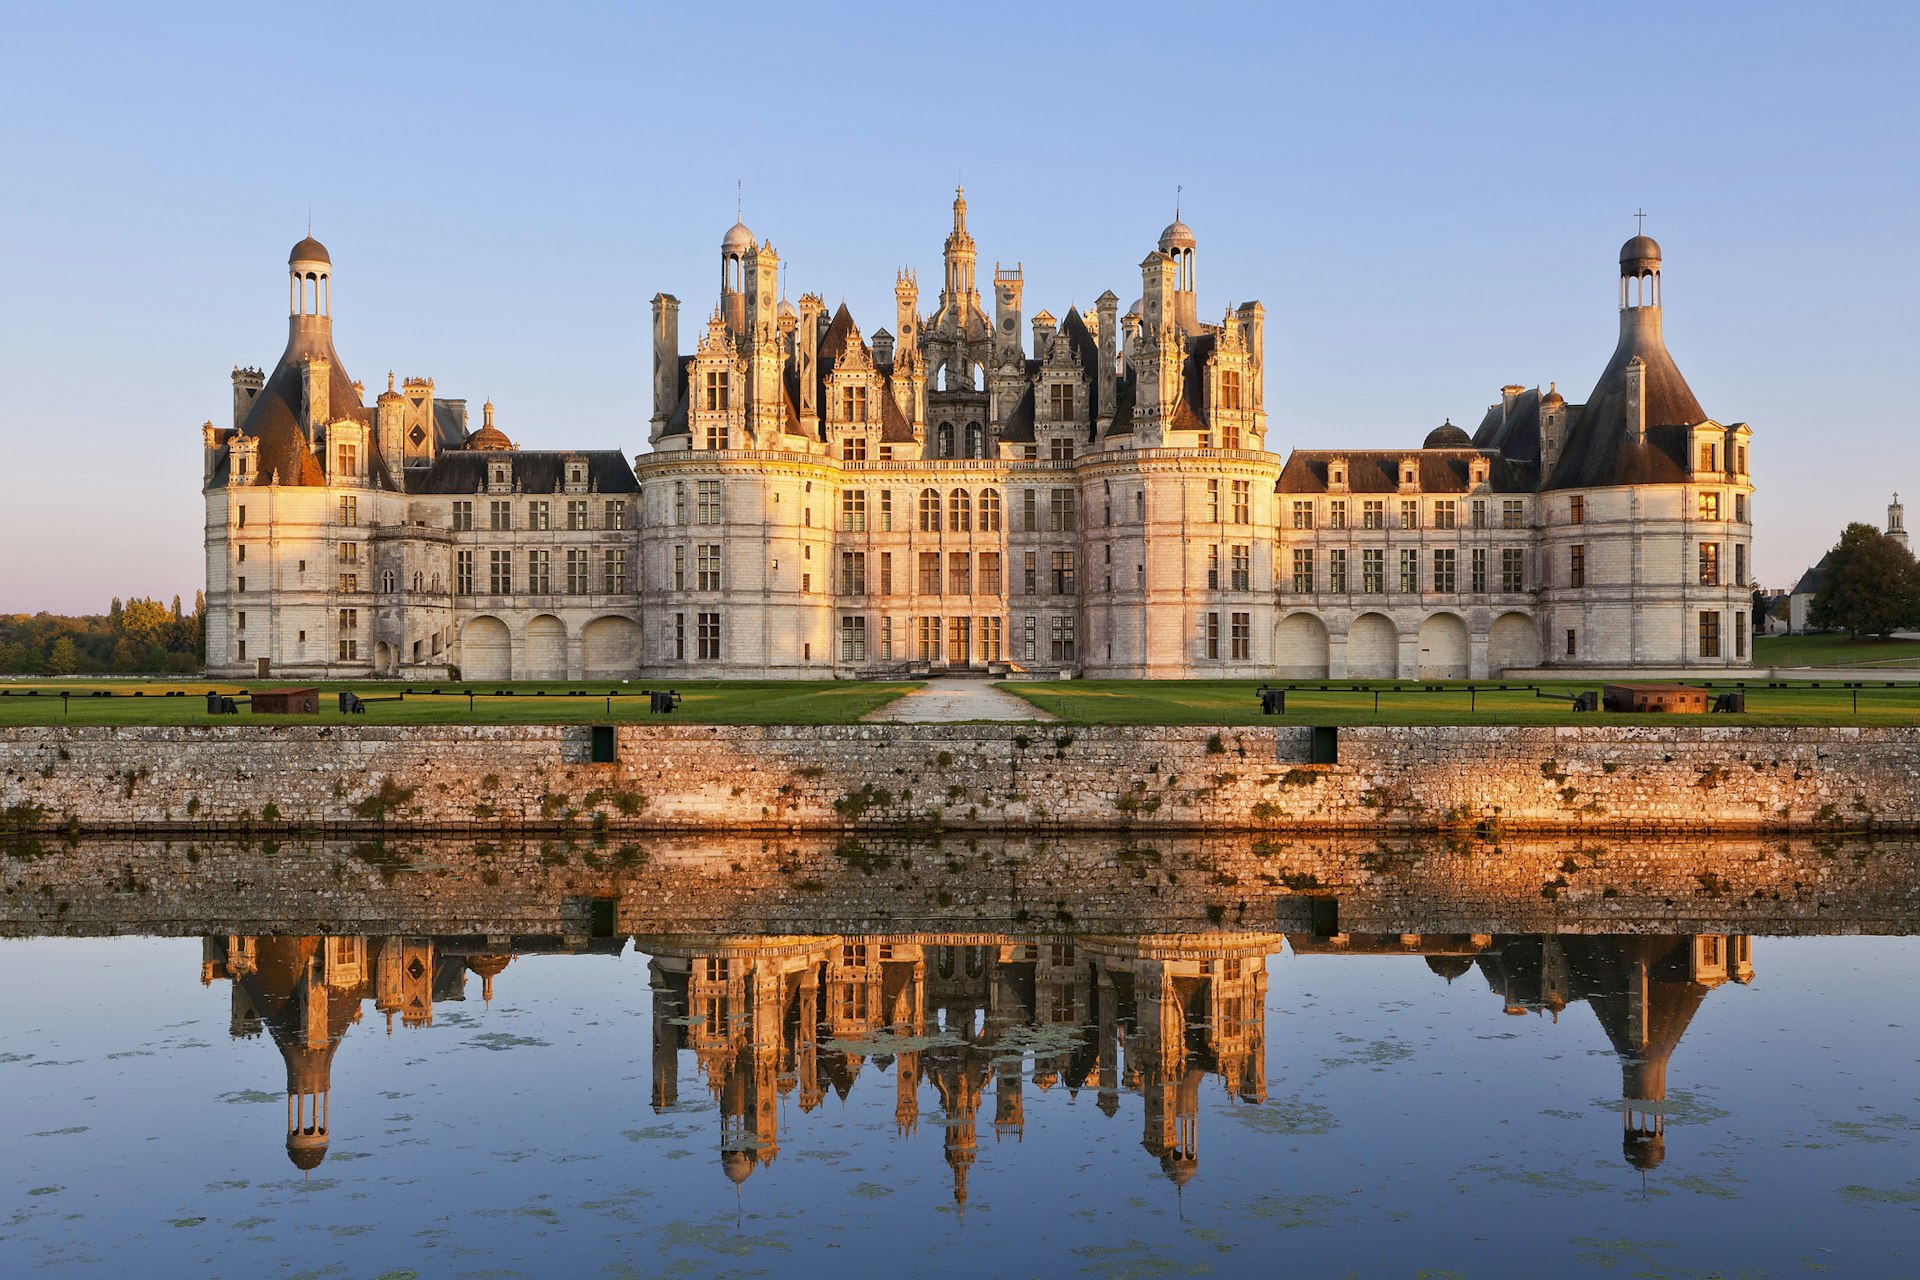 The ornate exterior of the Château de Chambord with its reflection in the lake at the front of the building